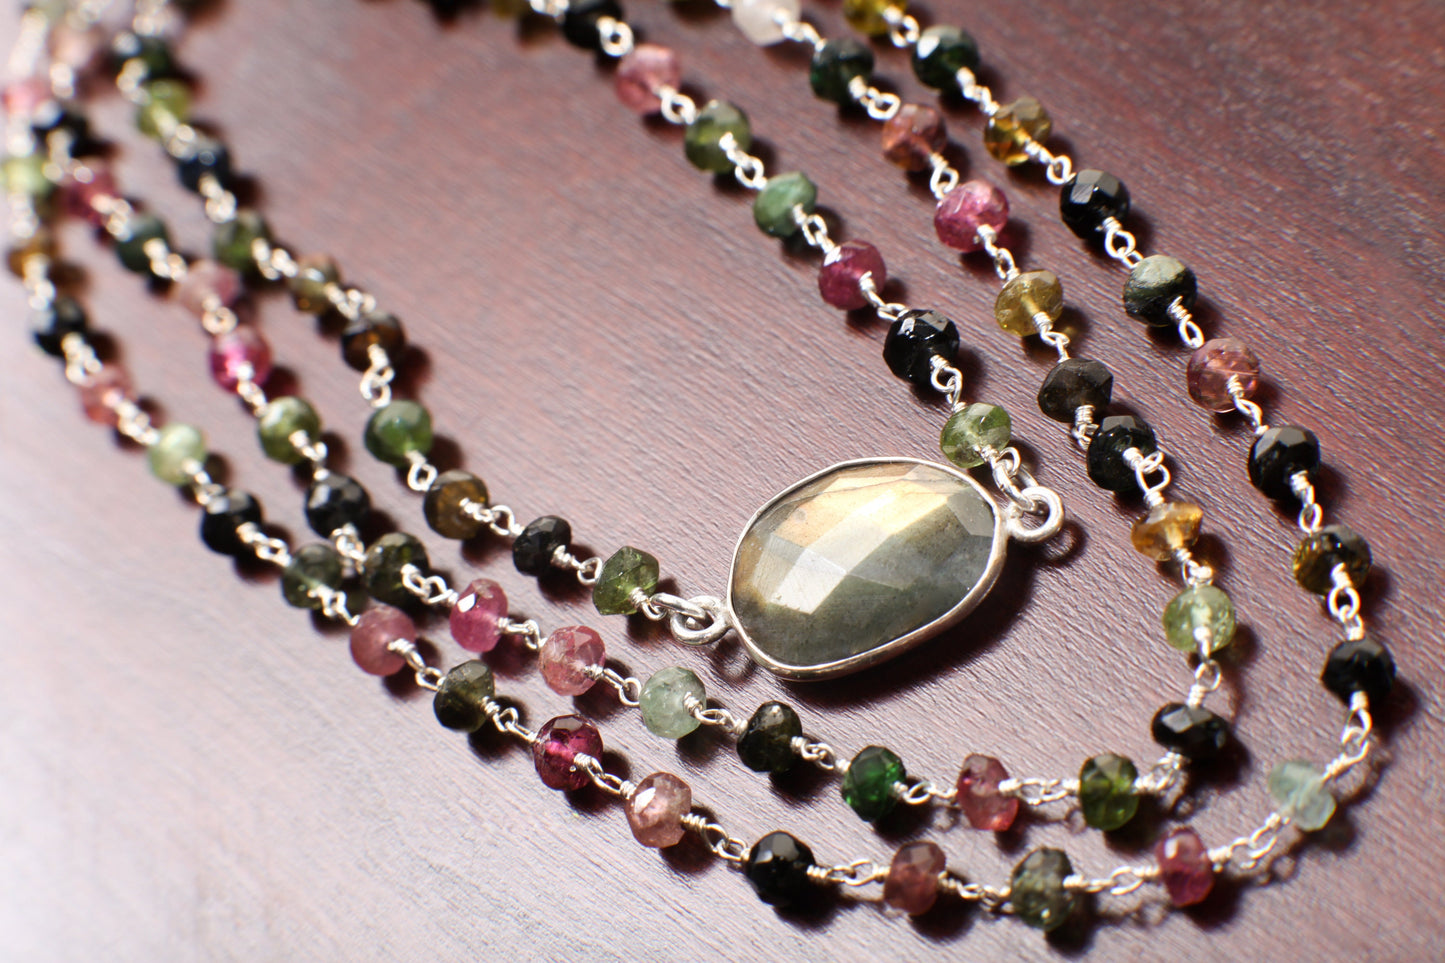 Tourmaline 4mm 3 layer with Labradorite bezel oval focal  925 Sterling Silver Adjustable Necklace. 18" plus 2" extension, Elegant gift.